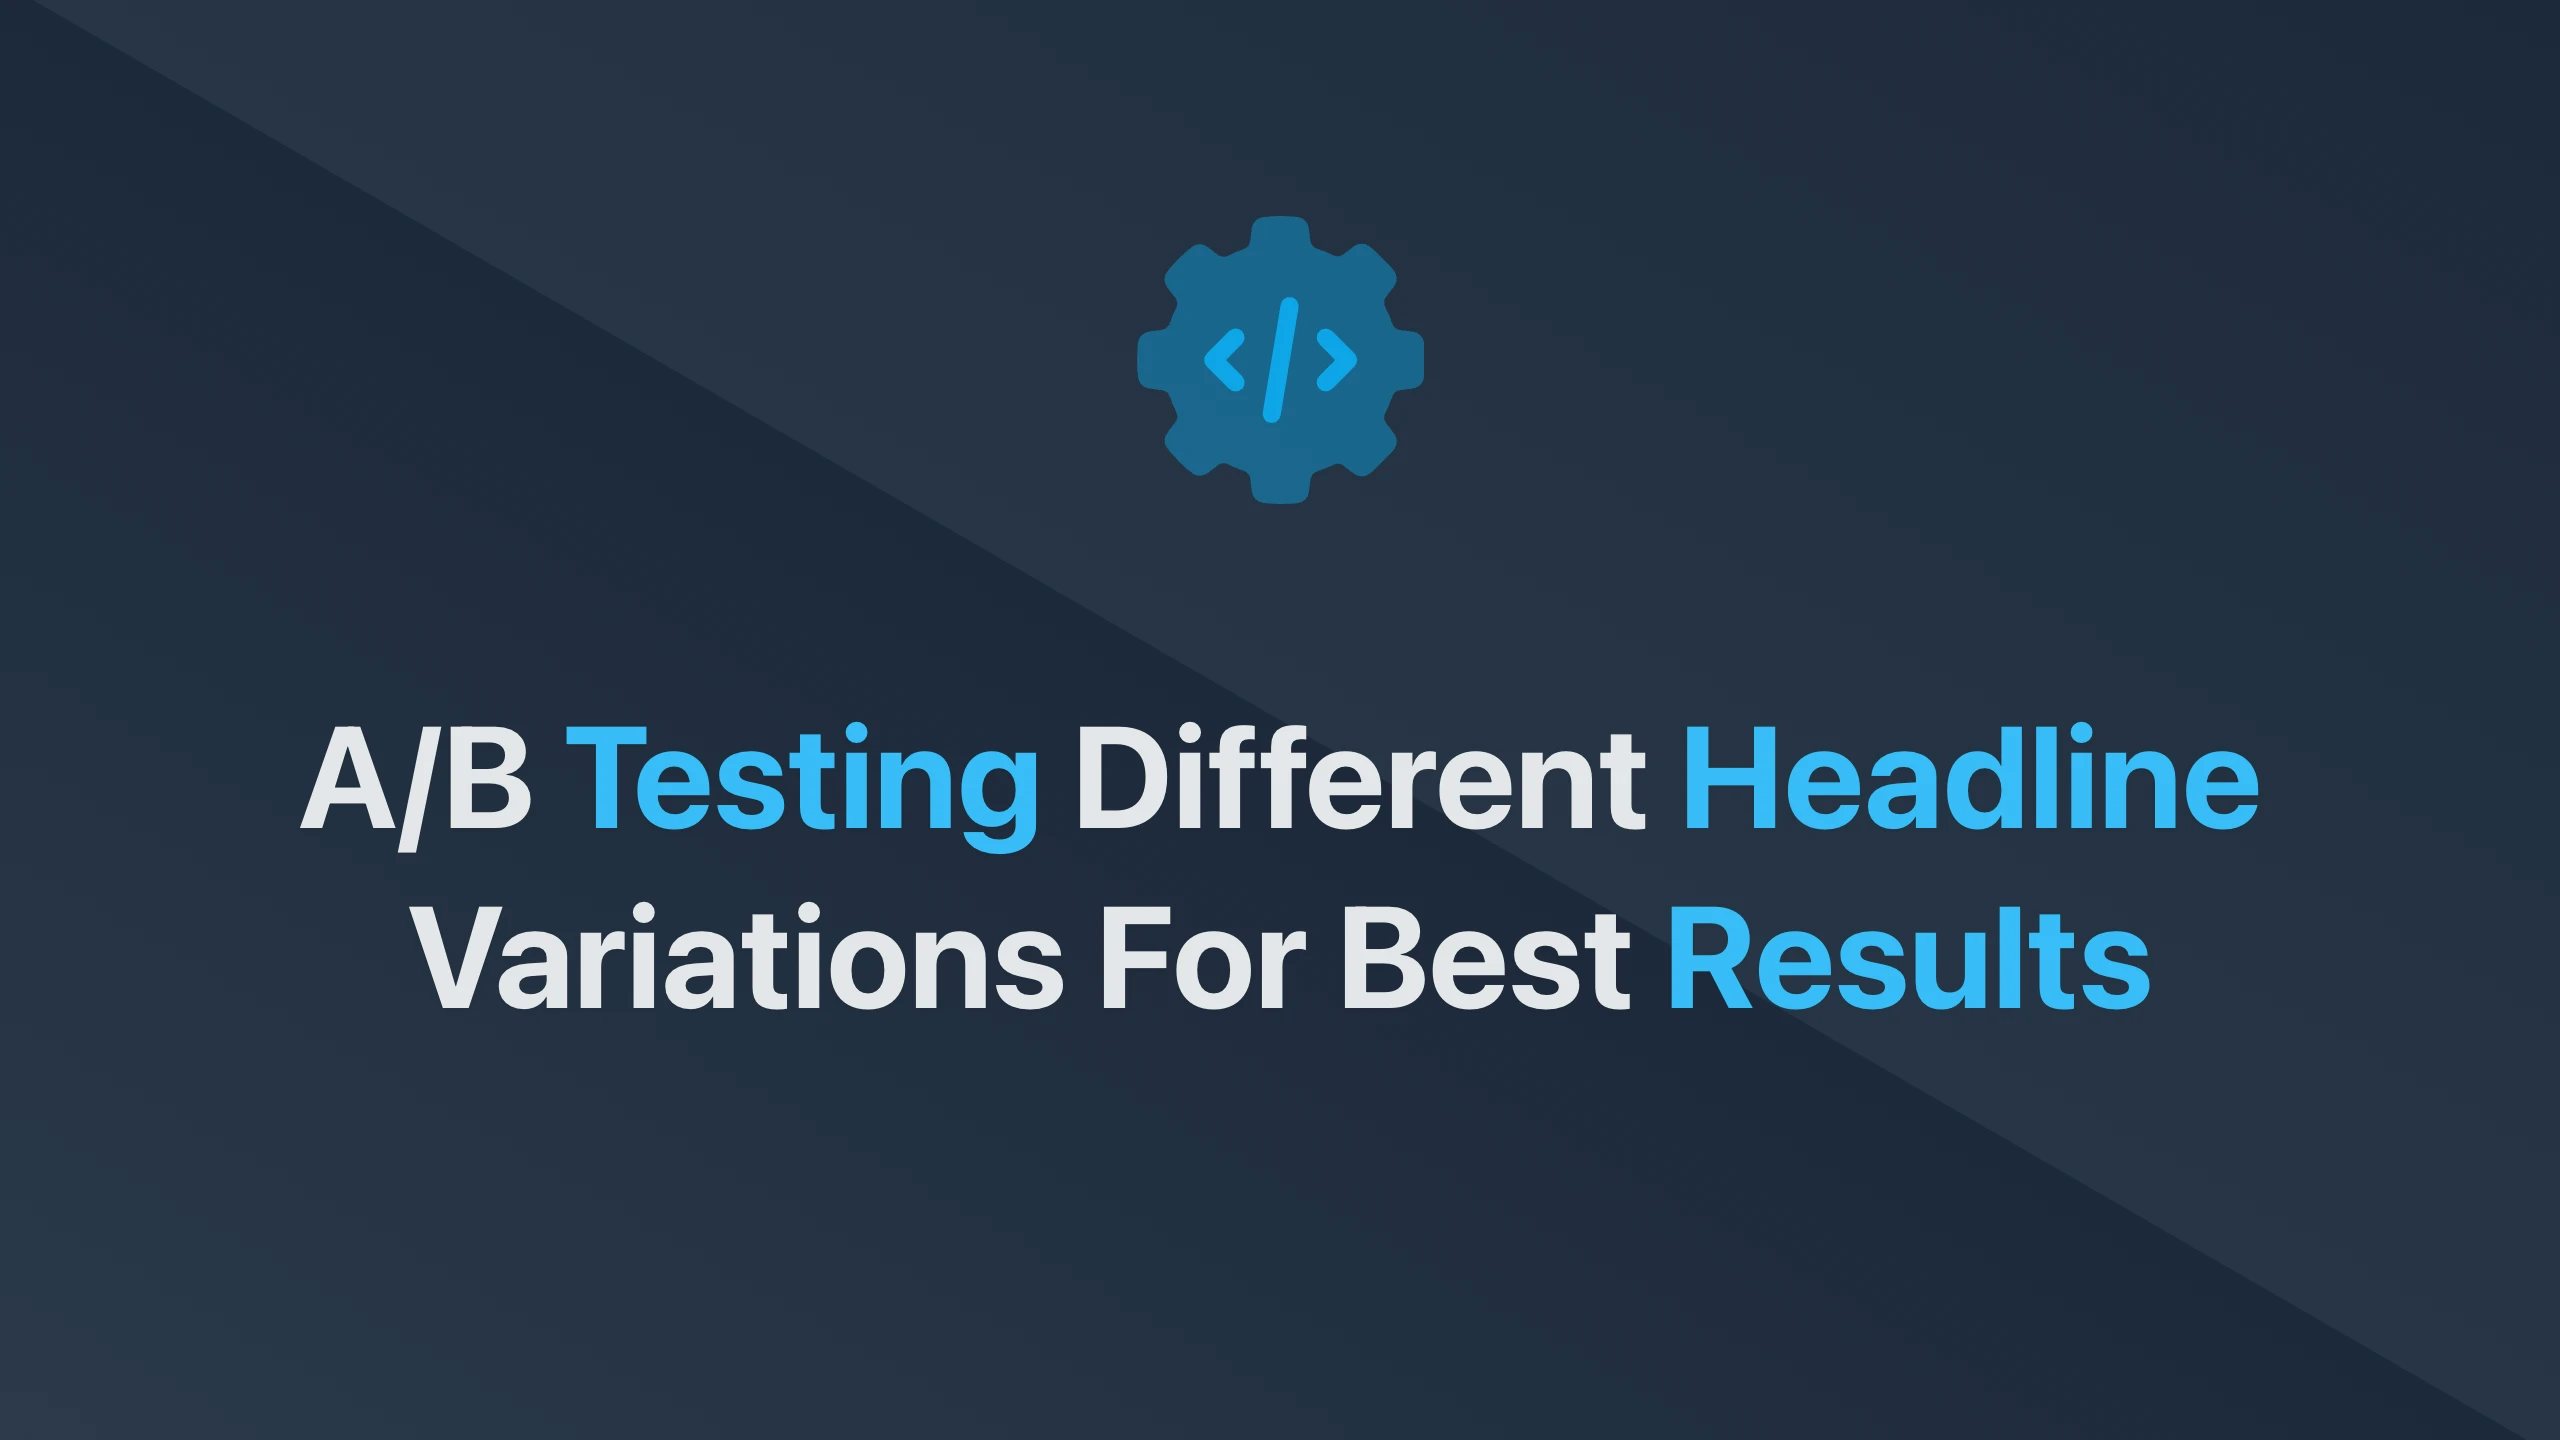 Cover Image for A/B Testing Different Headline Variations for Best Results